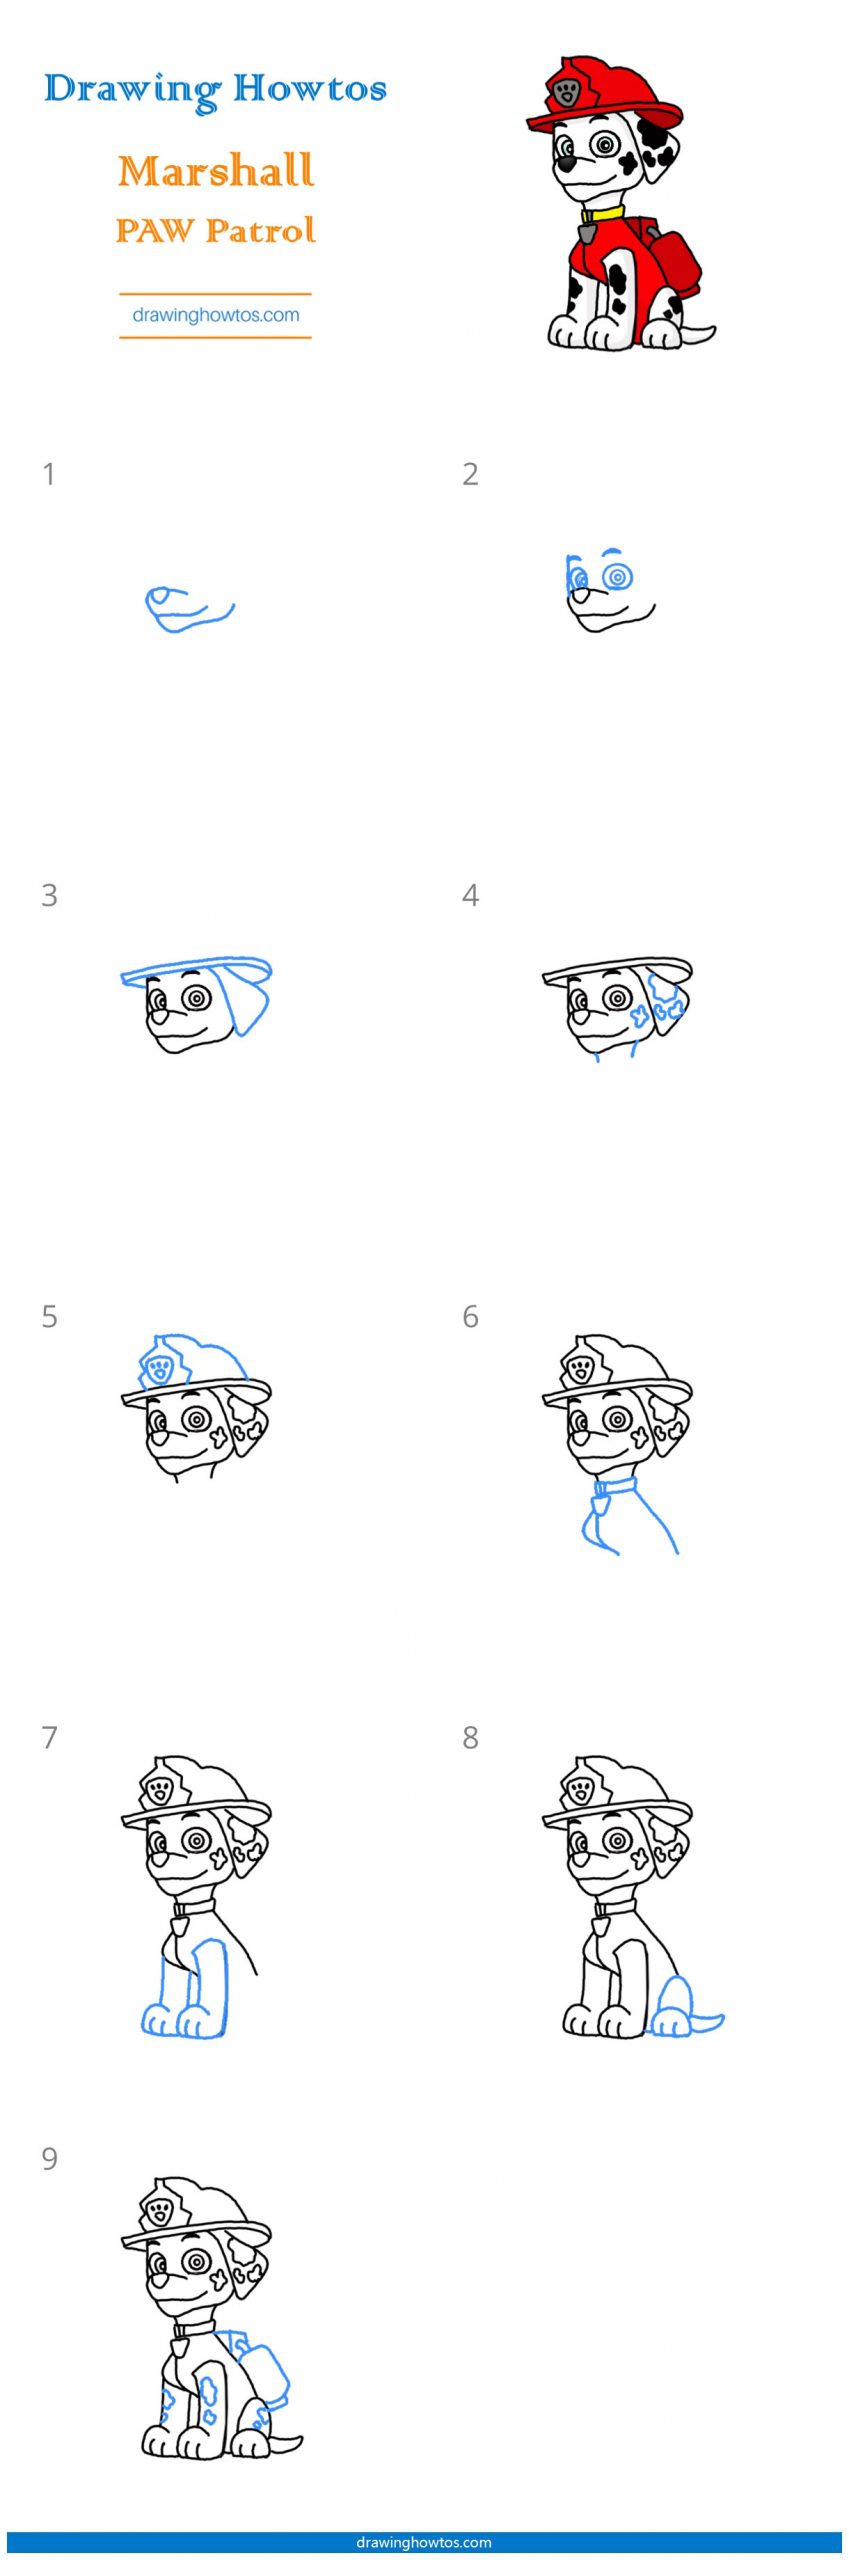 How to Draw Marshall from Paw Patrol Step by Step